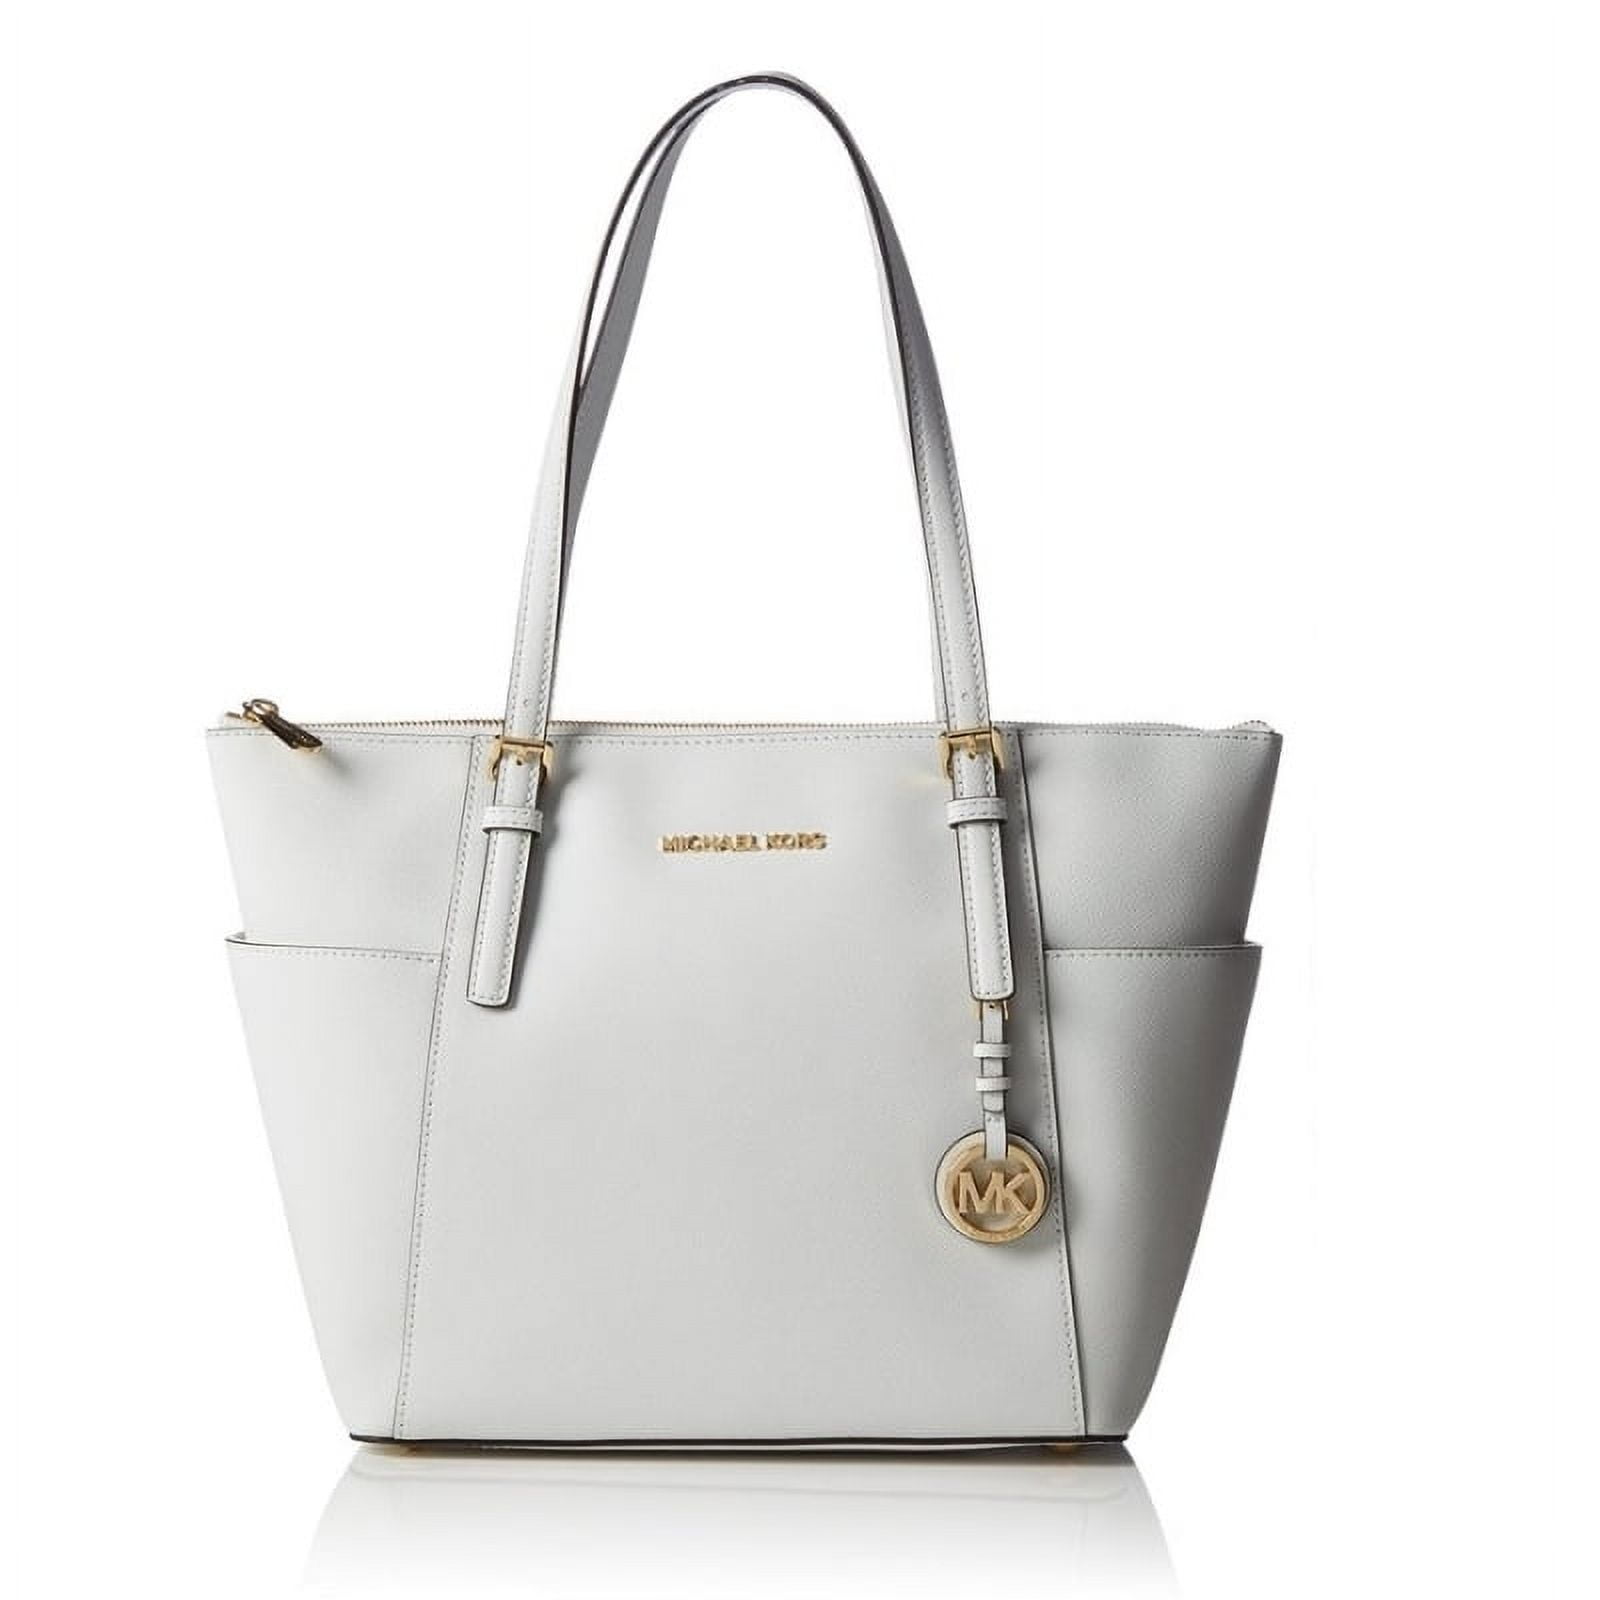 Michael Kors Optic White Ava Small Saffiano Leather Satchel, Best Price  and Reviews